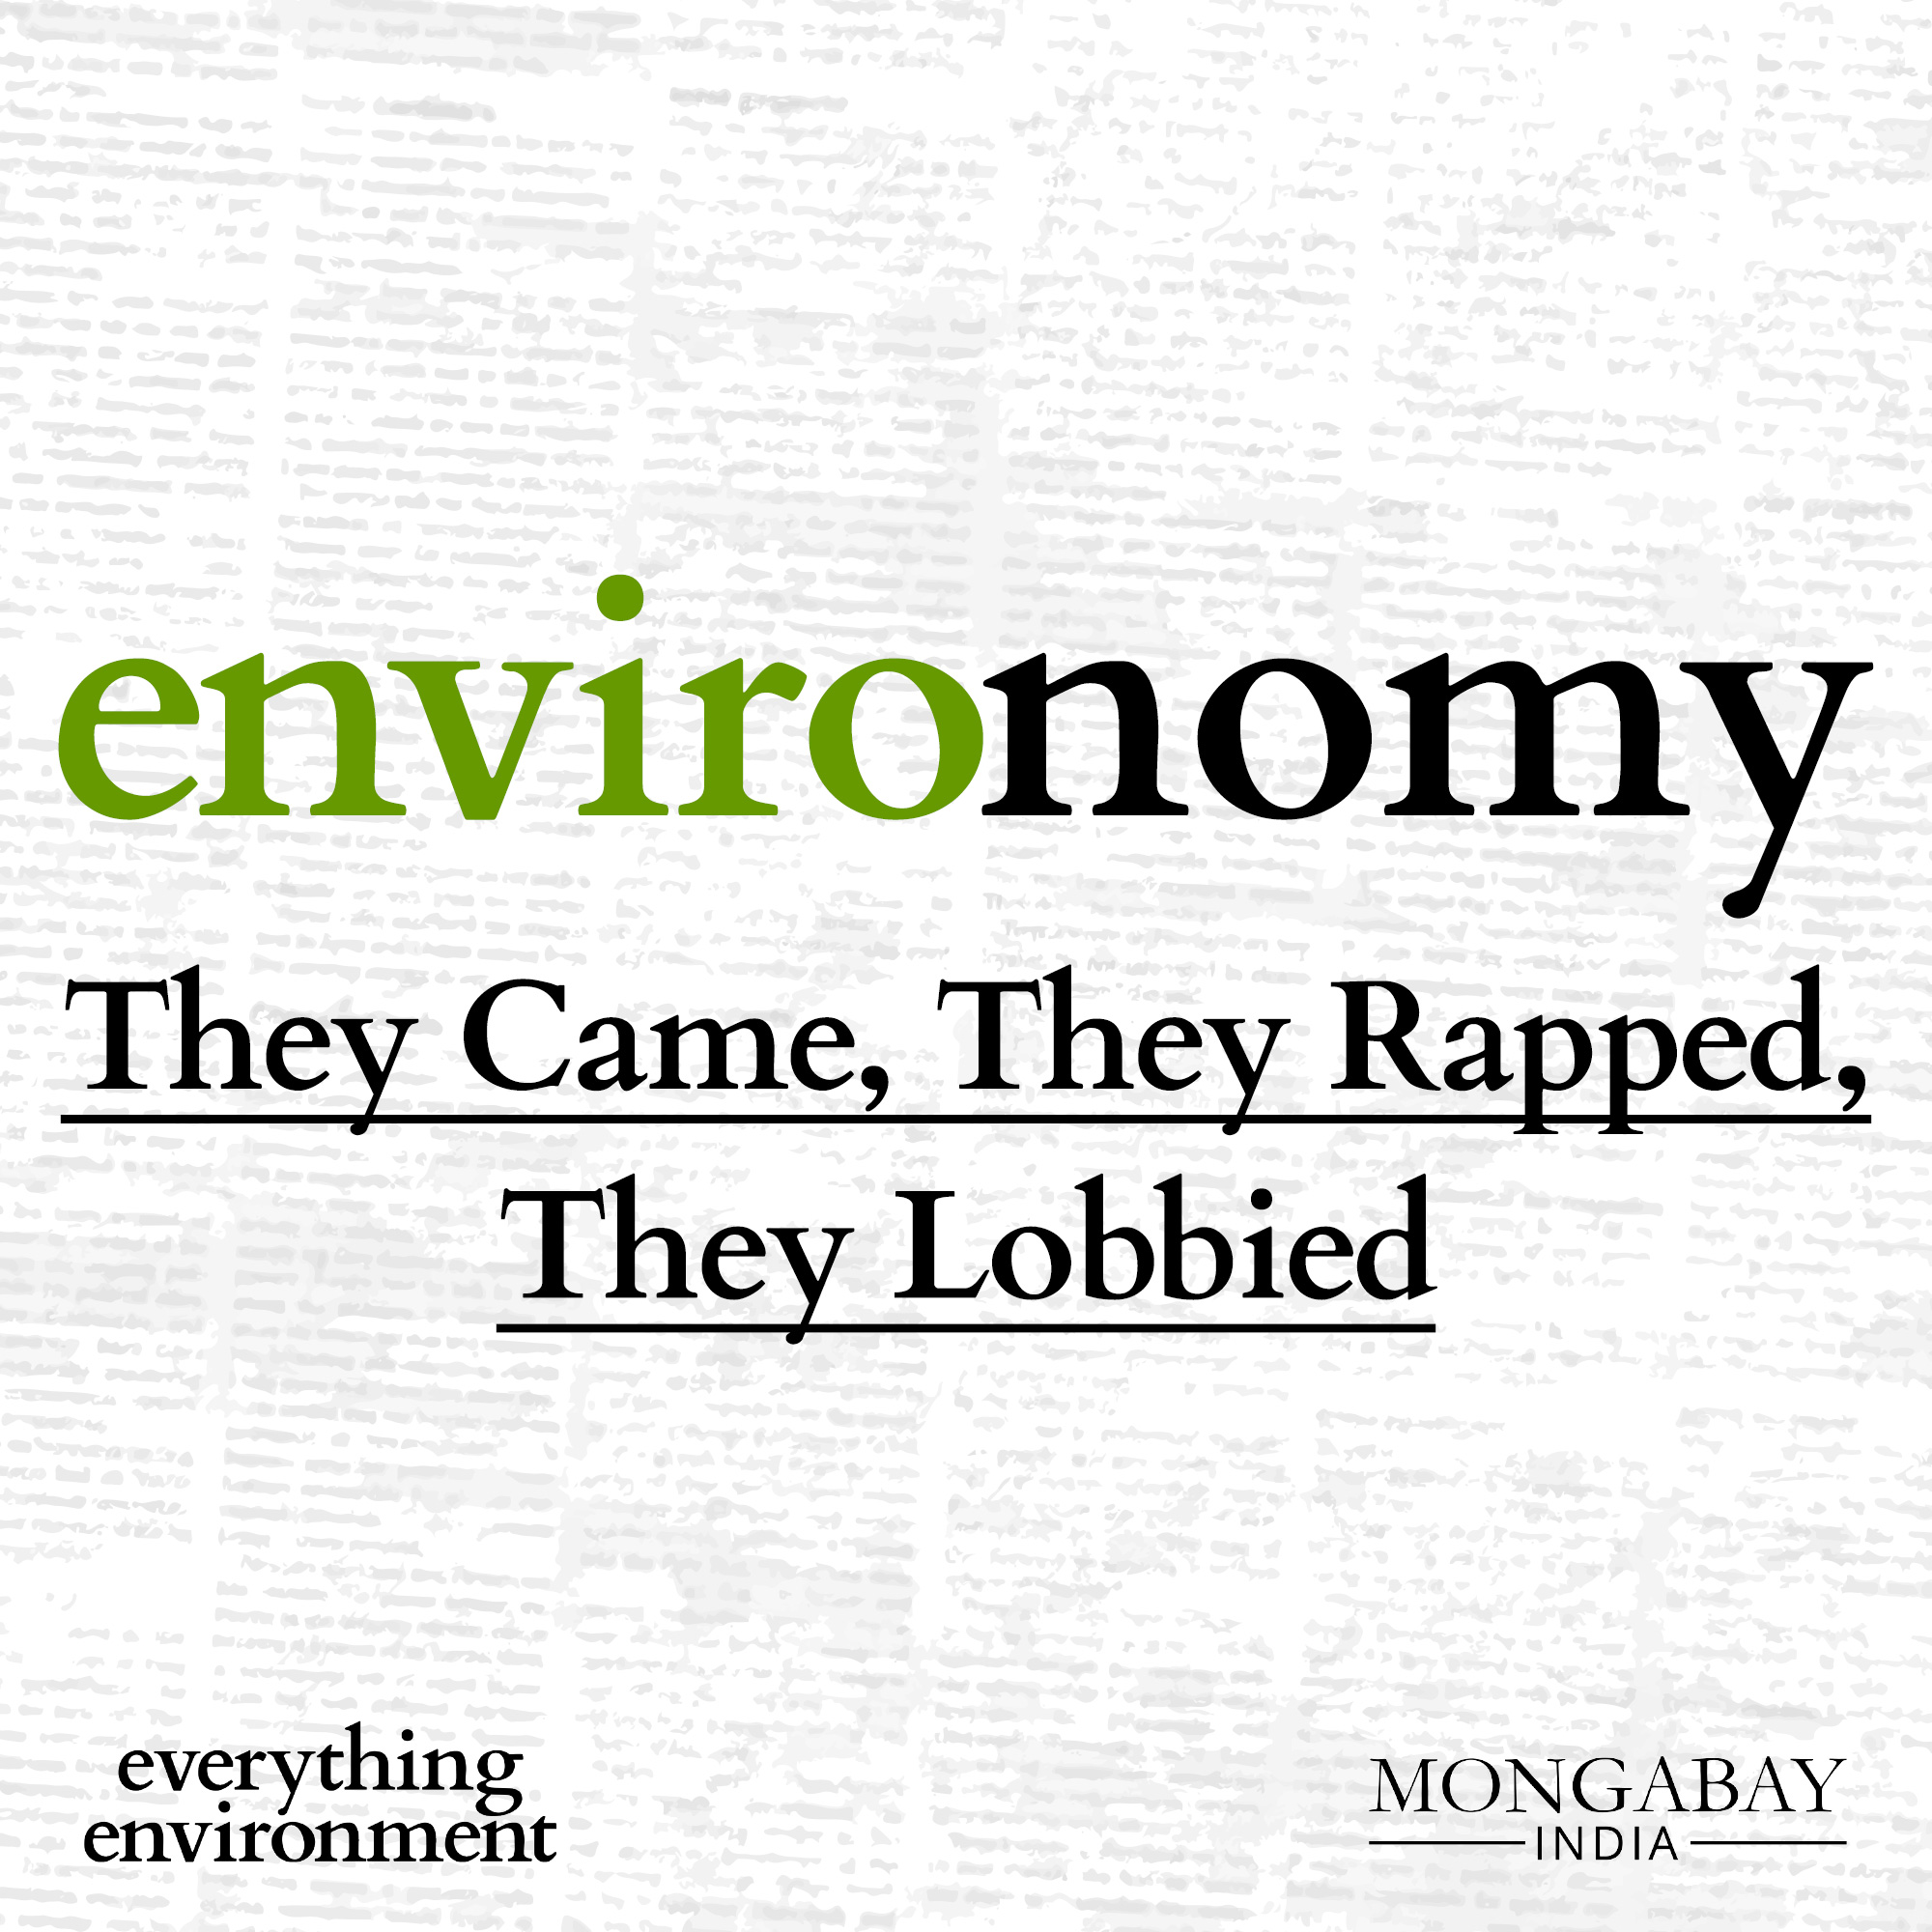 Environomy: They Came, They Rapped, They Lobbied